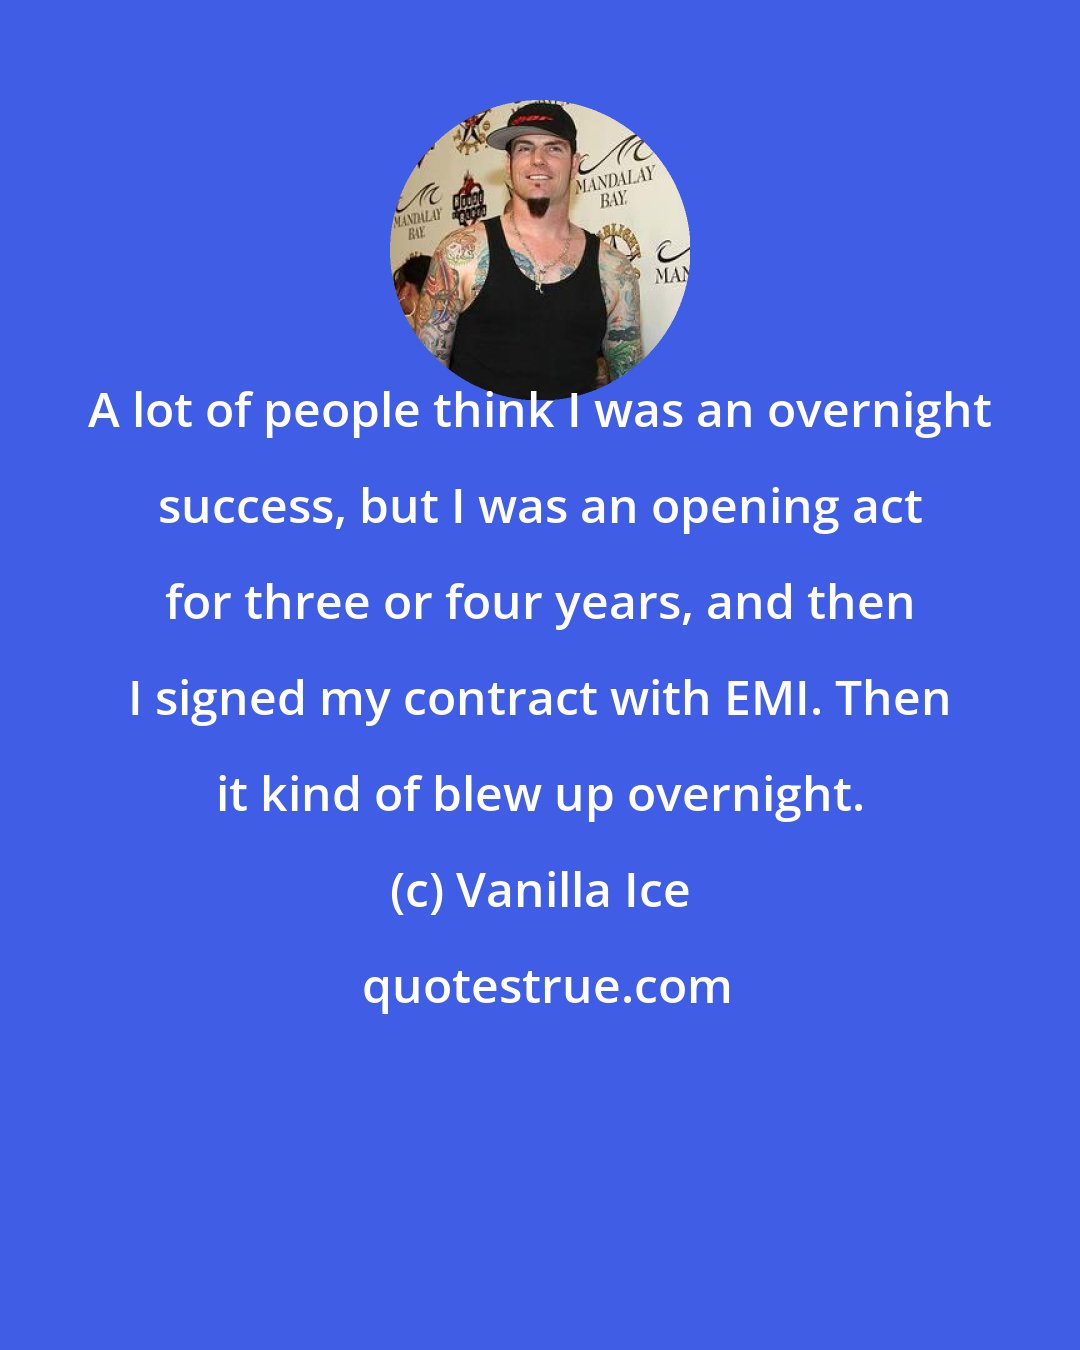 Vanilla Ice: A lot of people think I was an overnight success, but I was an opening act for three or four years, and then I signed my contract with EMI. Then it kind of blew up overnight.